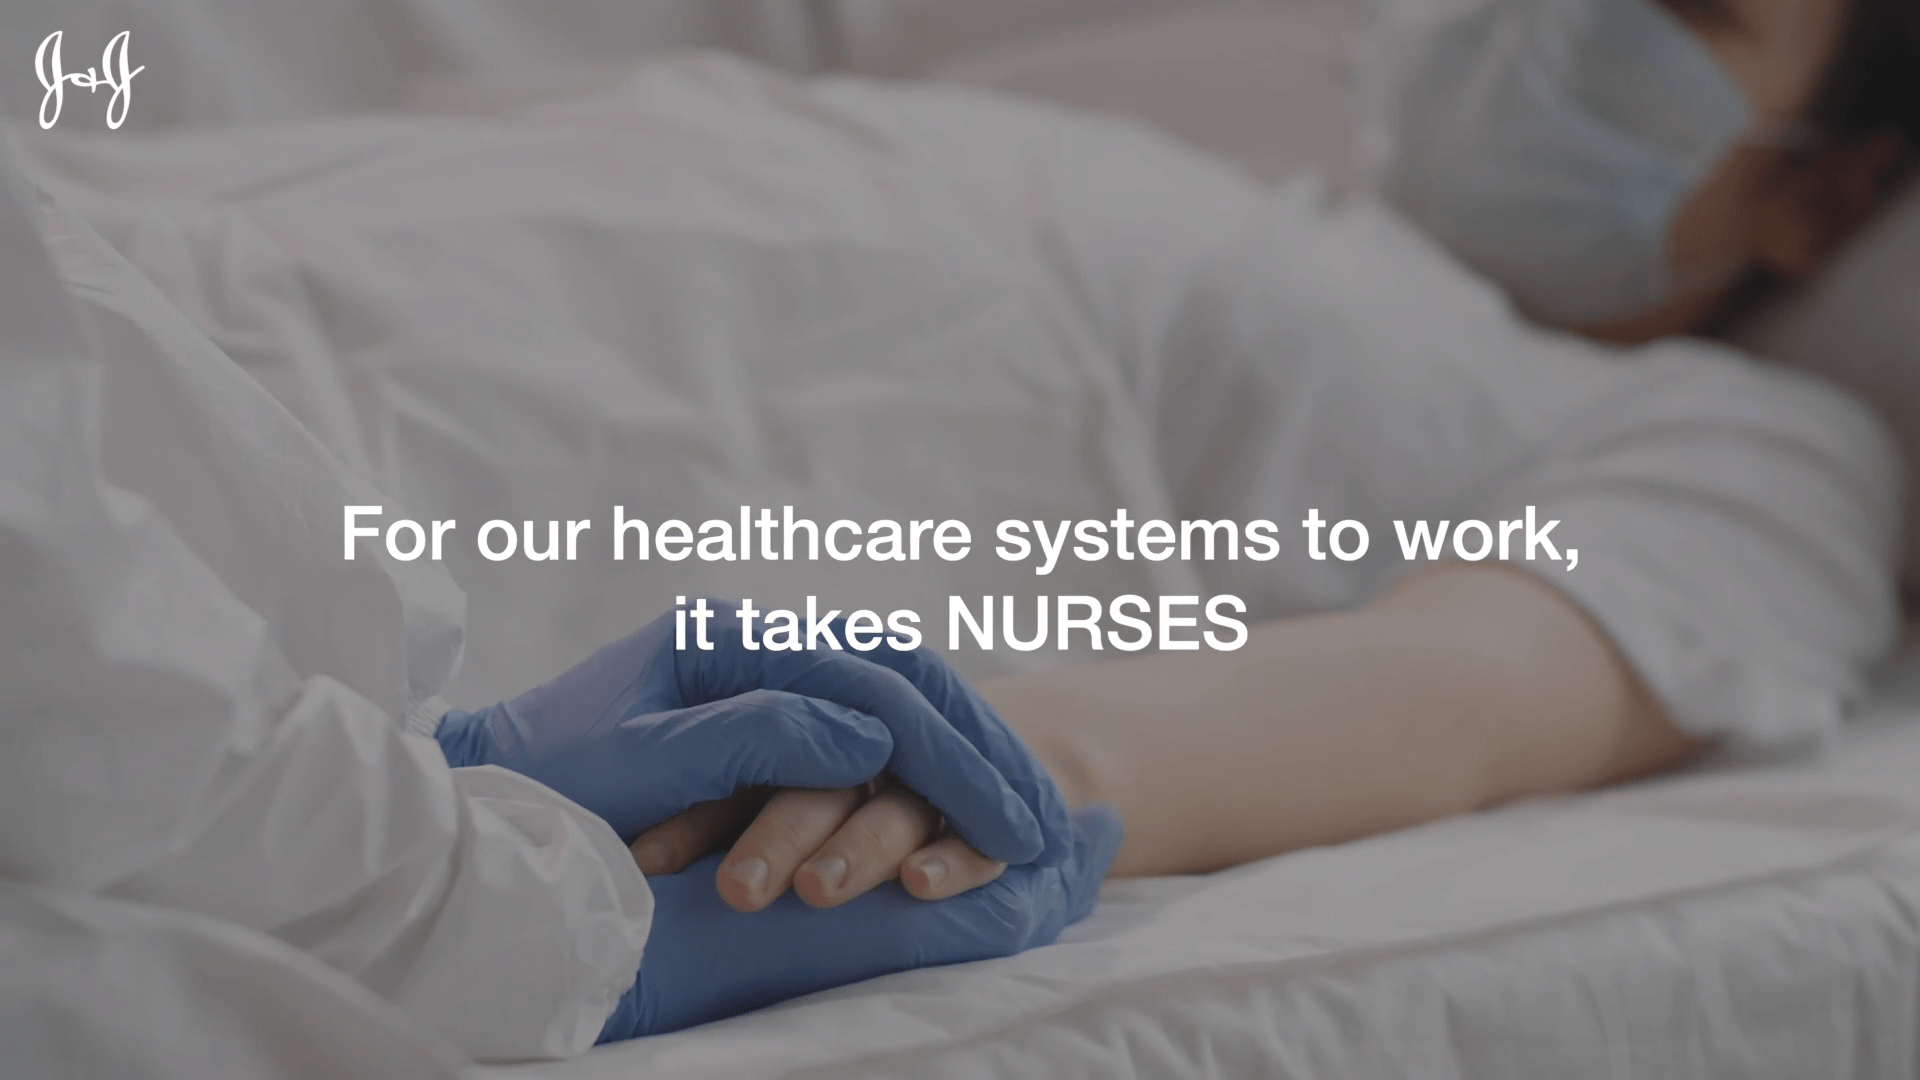 Nurses Rise to the Challenge Every Day Header Image